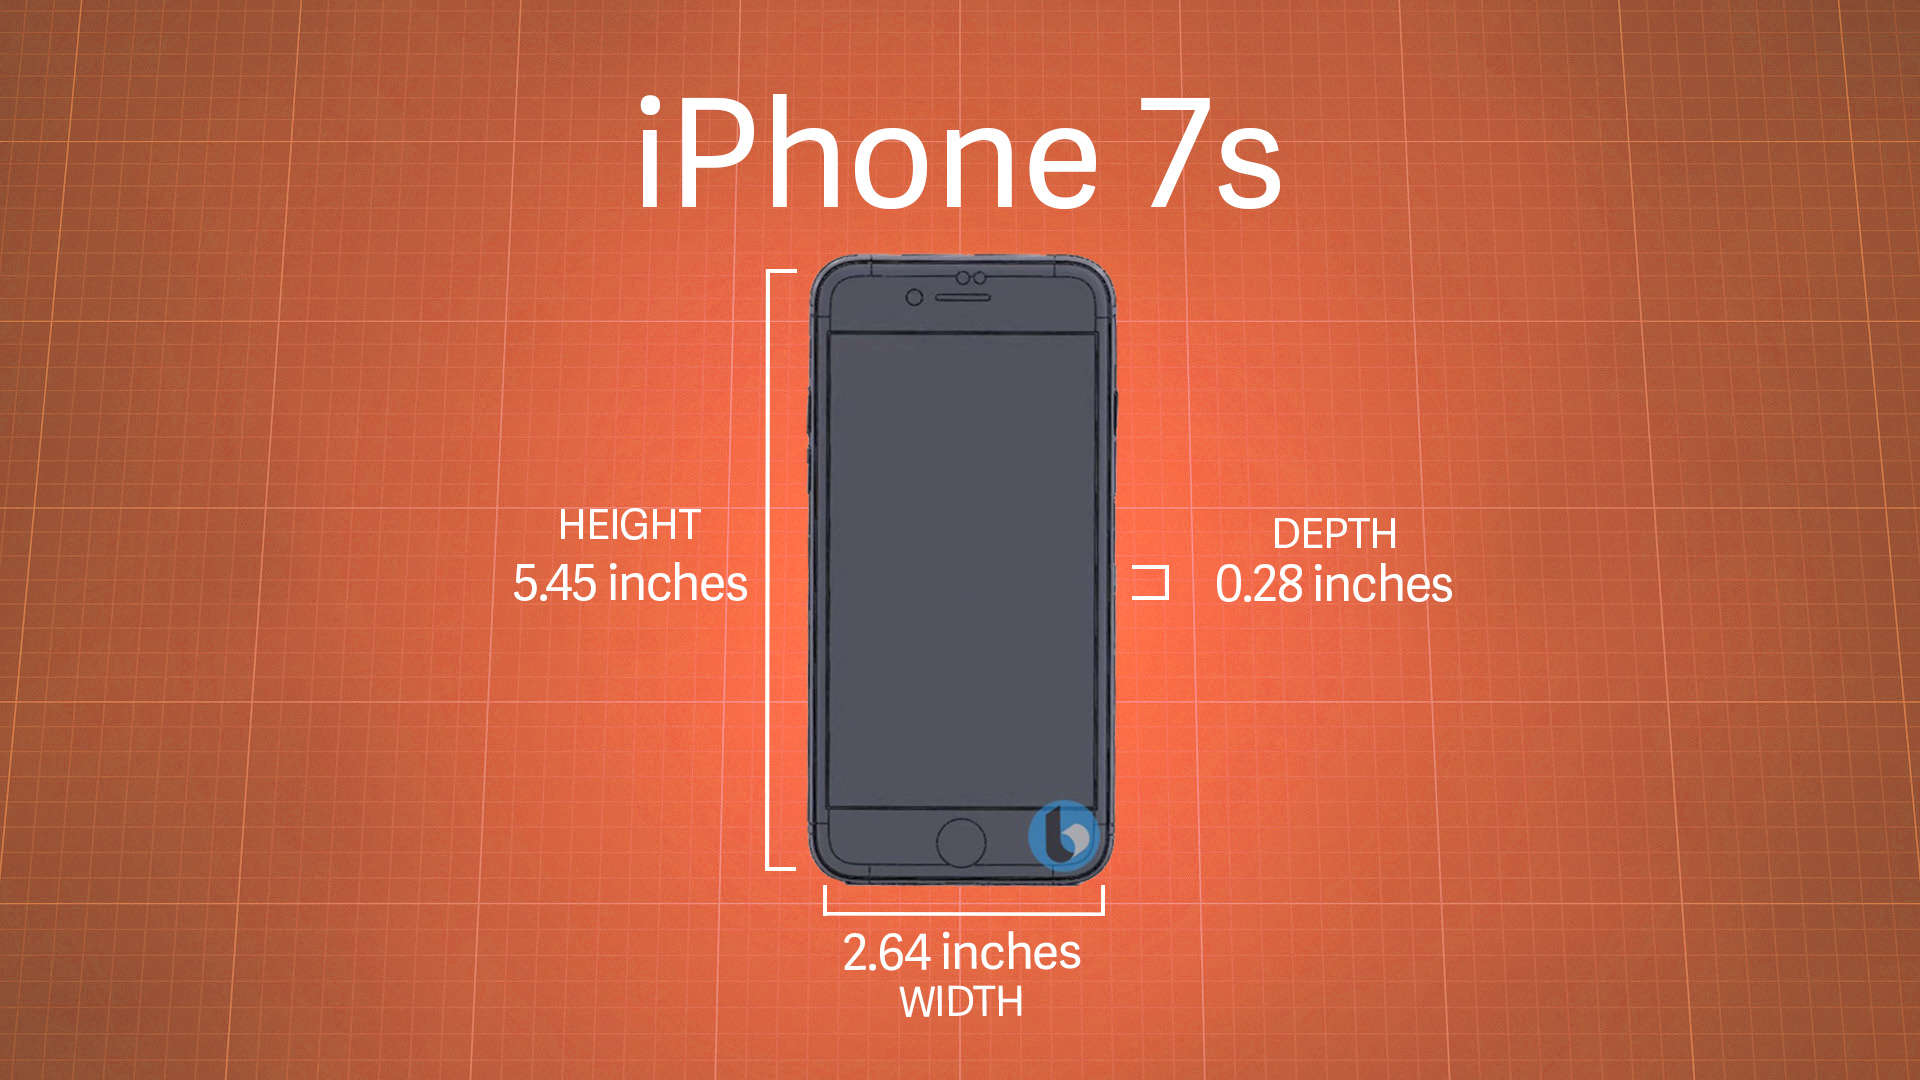 iPhone 7s dimensions